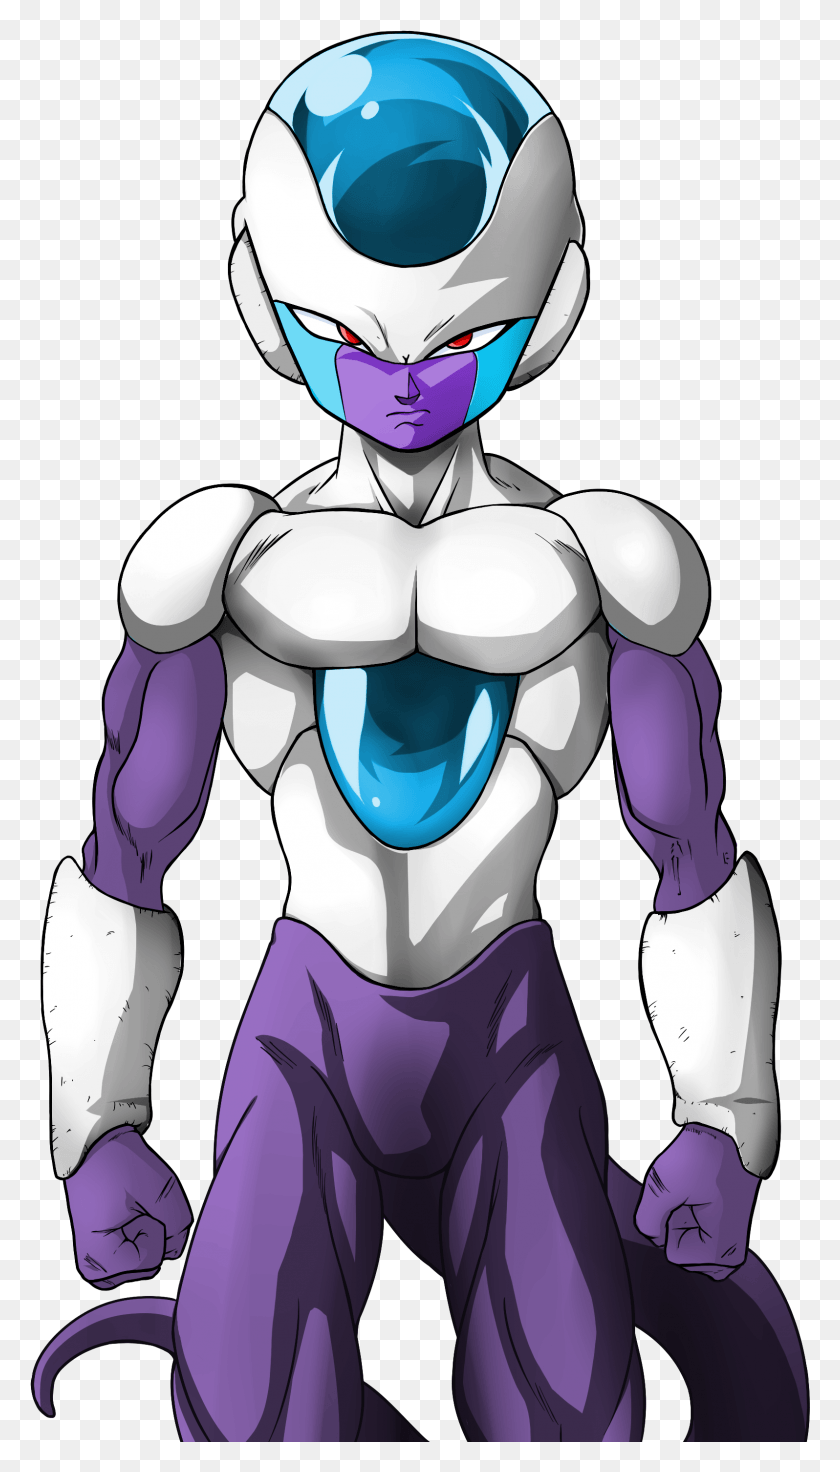 1596x2891 Not As Drastically Differing From His Previous Transformations Frost Dragon Ball Super, Helmet, Clothing, Apparel Descargar Hd Png